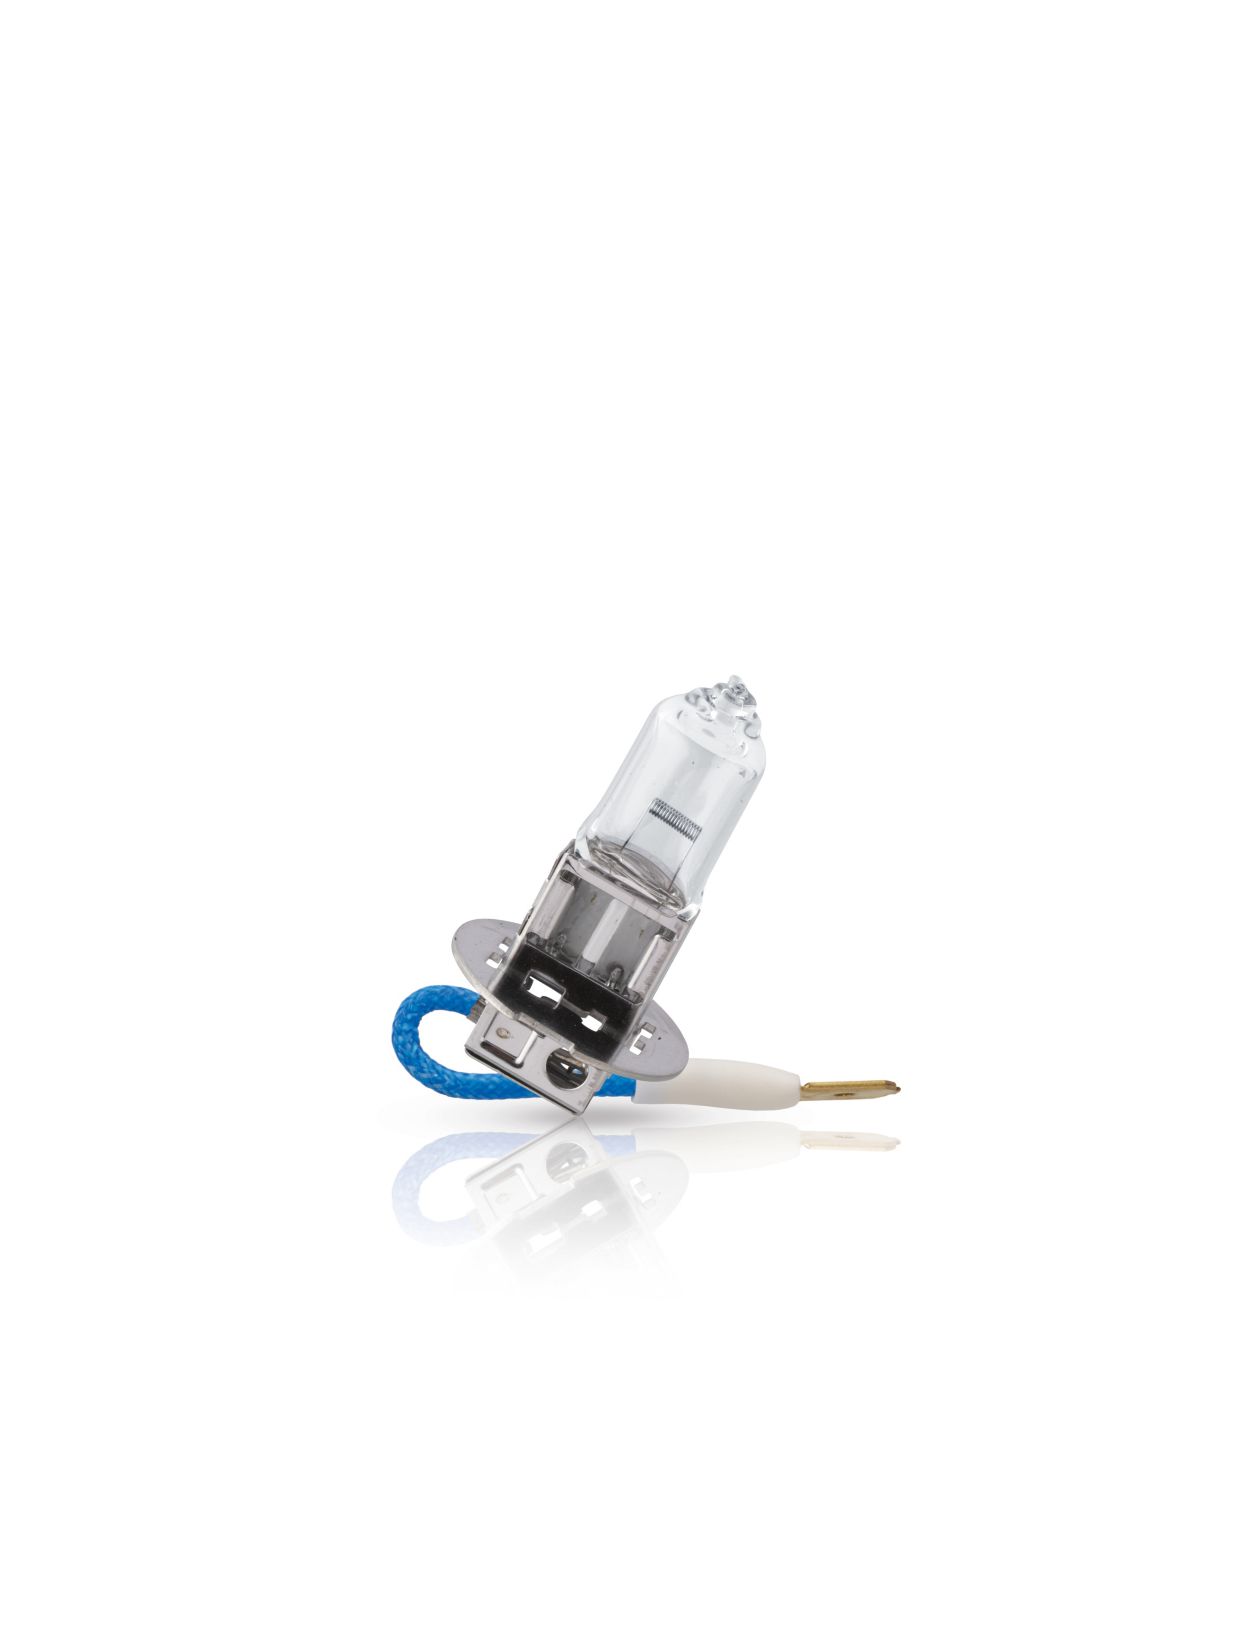 Ampoule H1 X1 LLECO 12V 55W PH PHILIPS - 12258LLECOB1 PHILIPS